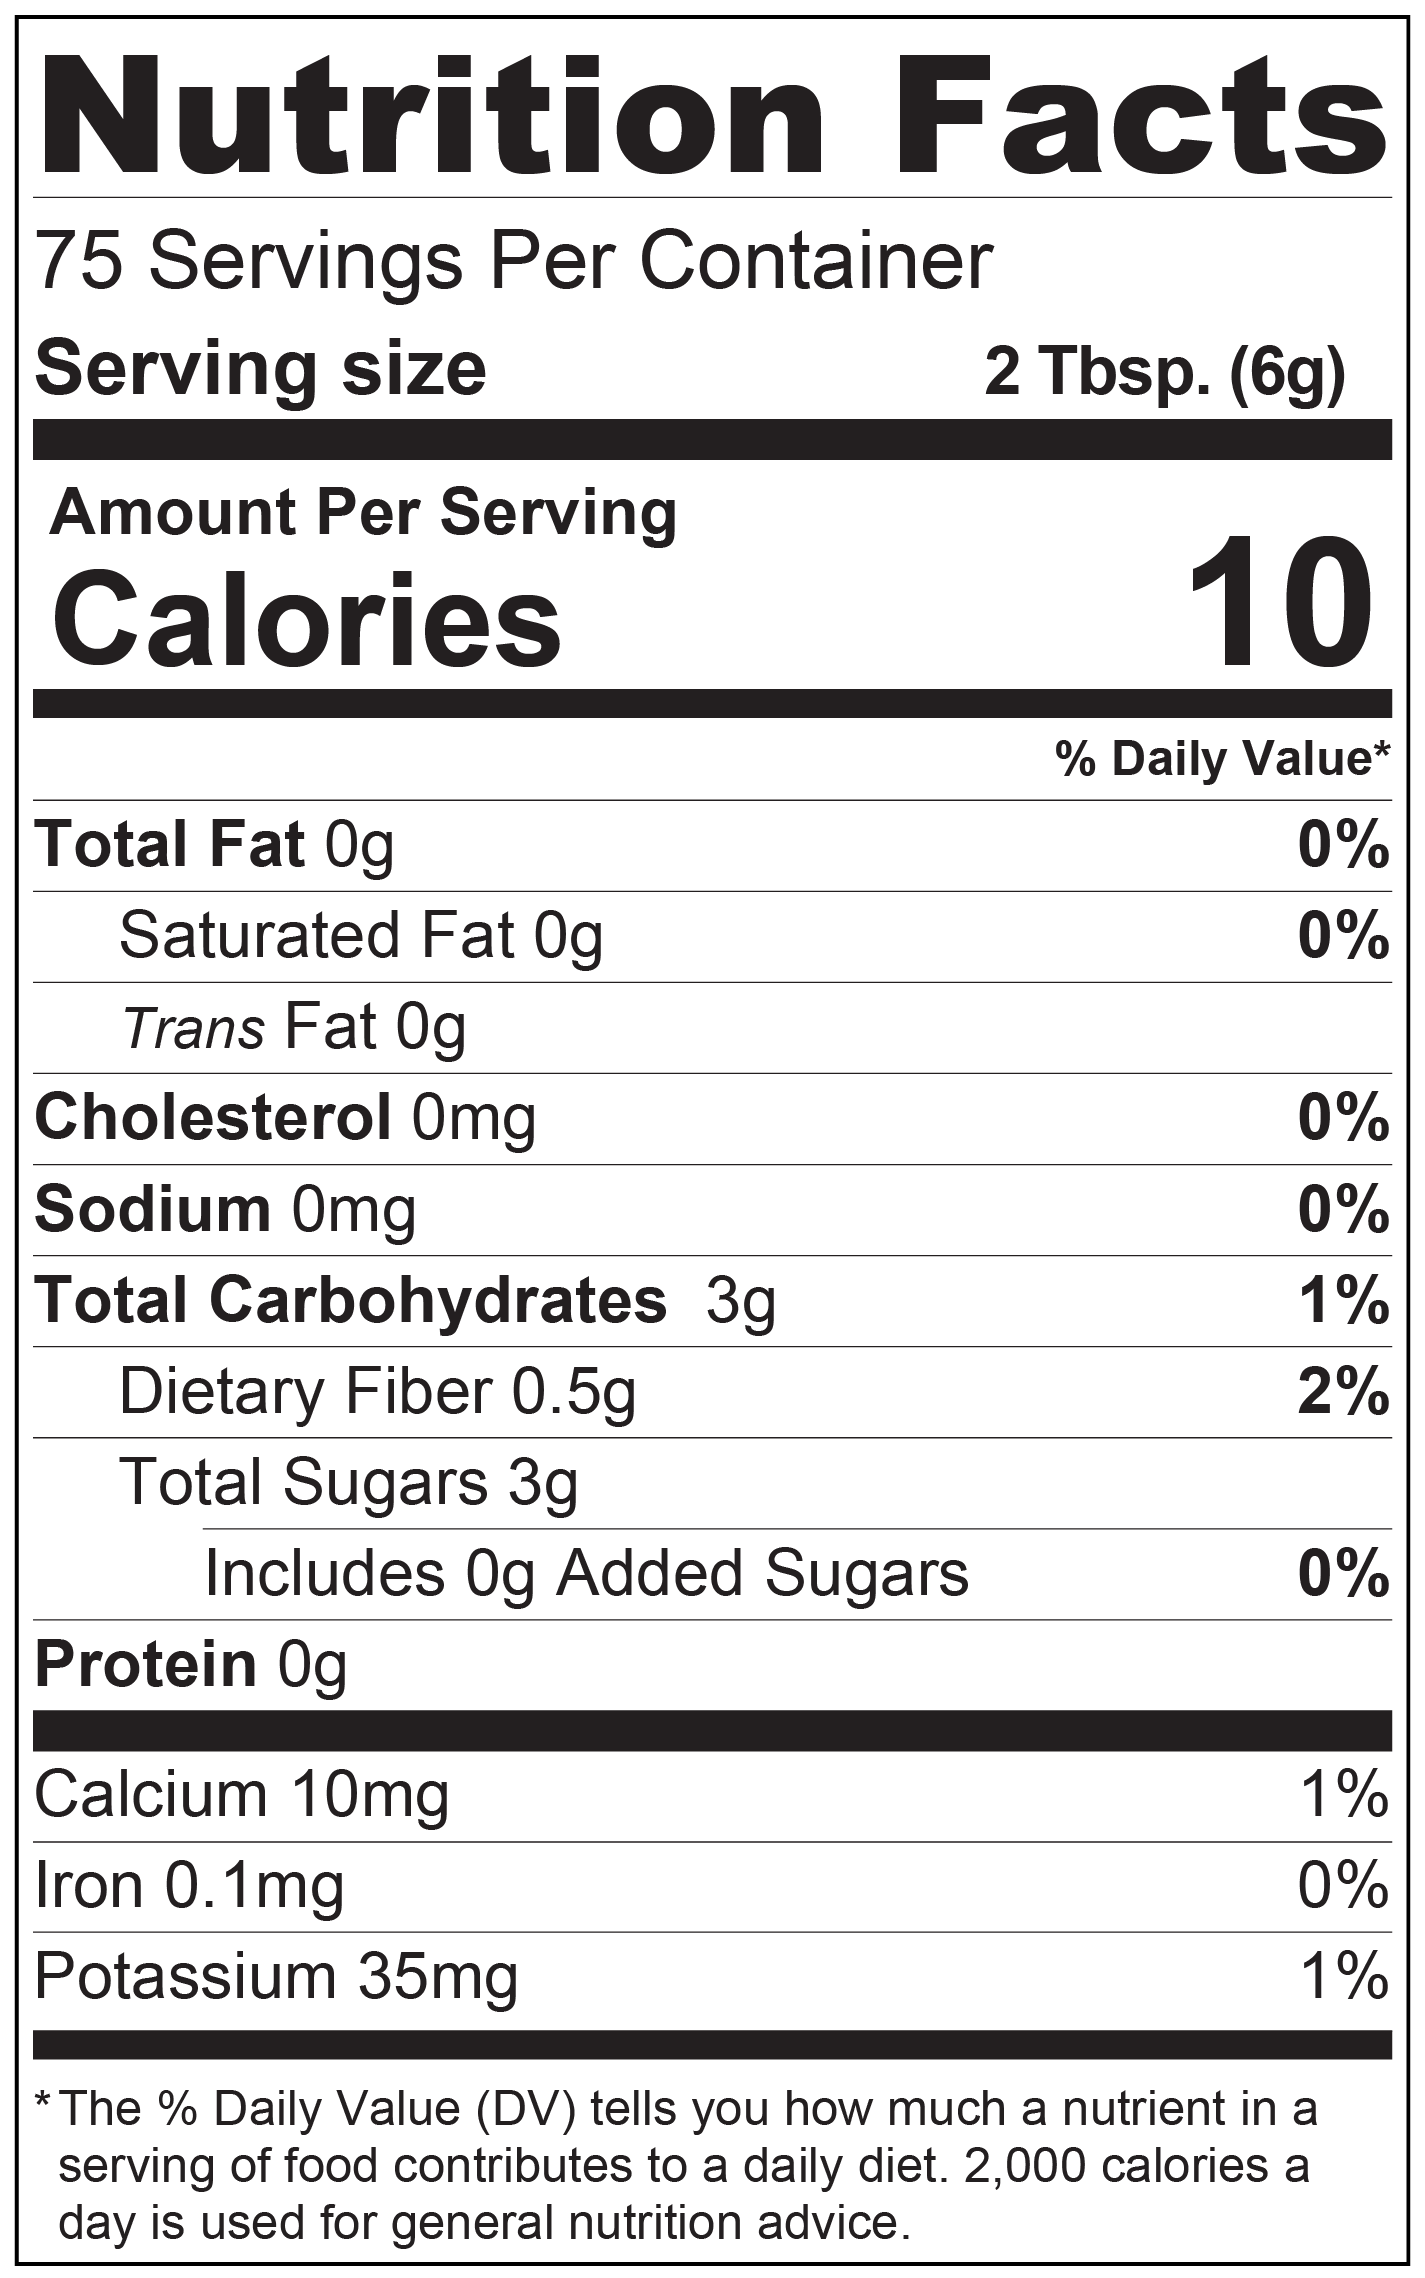 Date Power_Nalya_Nutrition Facts.png